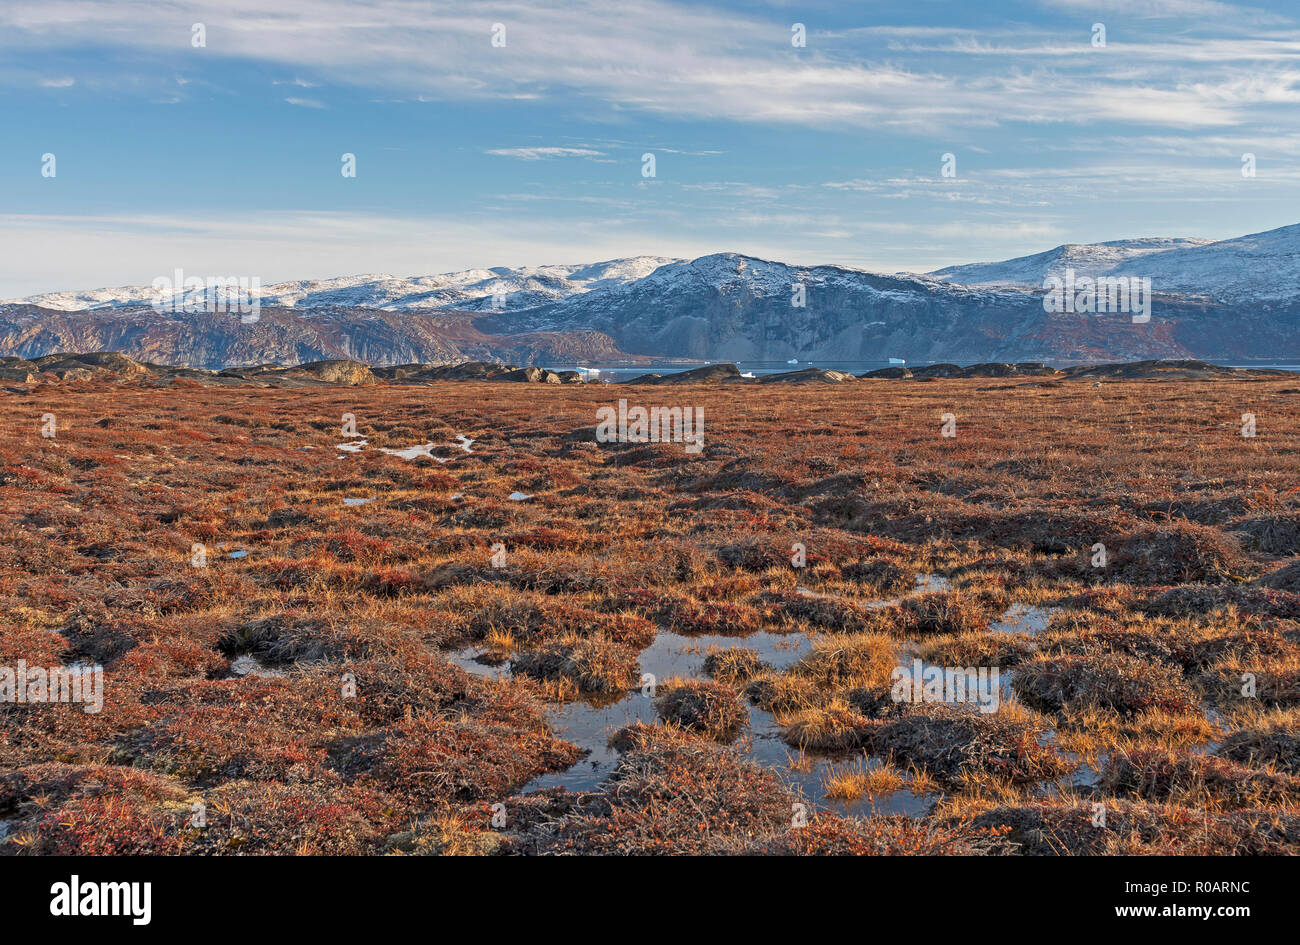 Tundra Wetlands in the High Arctic near Equip Sermia in Greenland Stock Photo